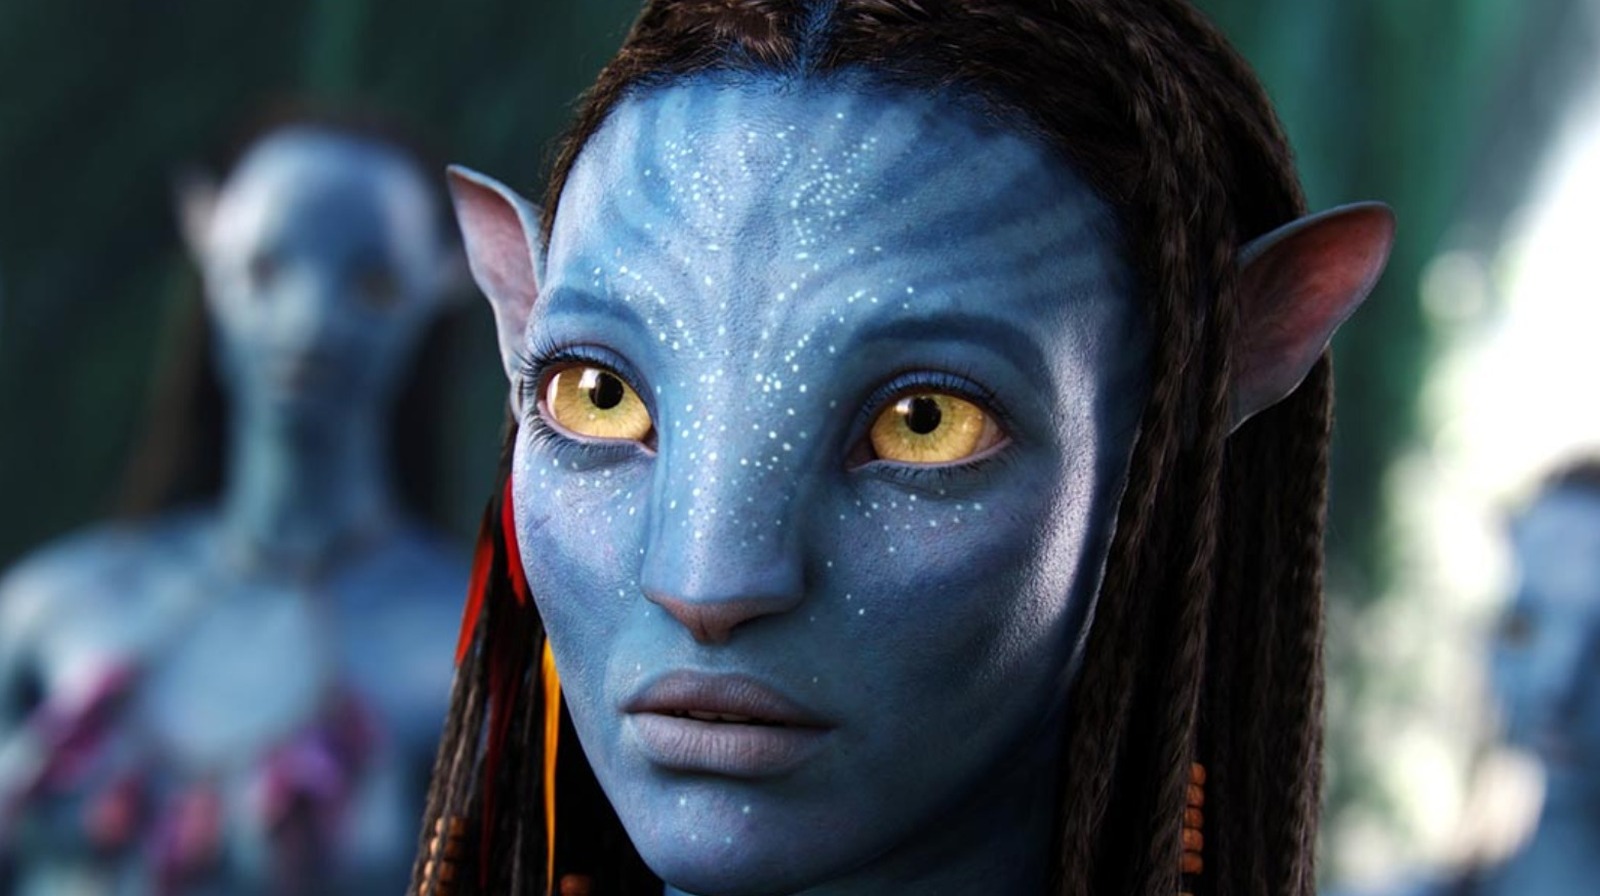 ‘Avatar’ Returns to Theaters and is The #1 Film Globally